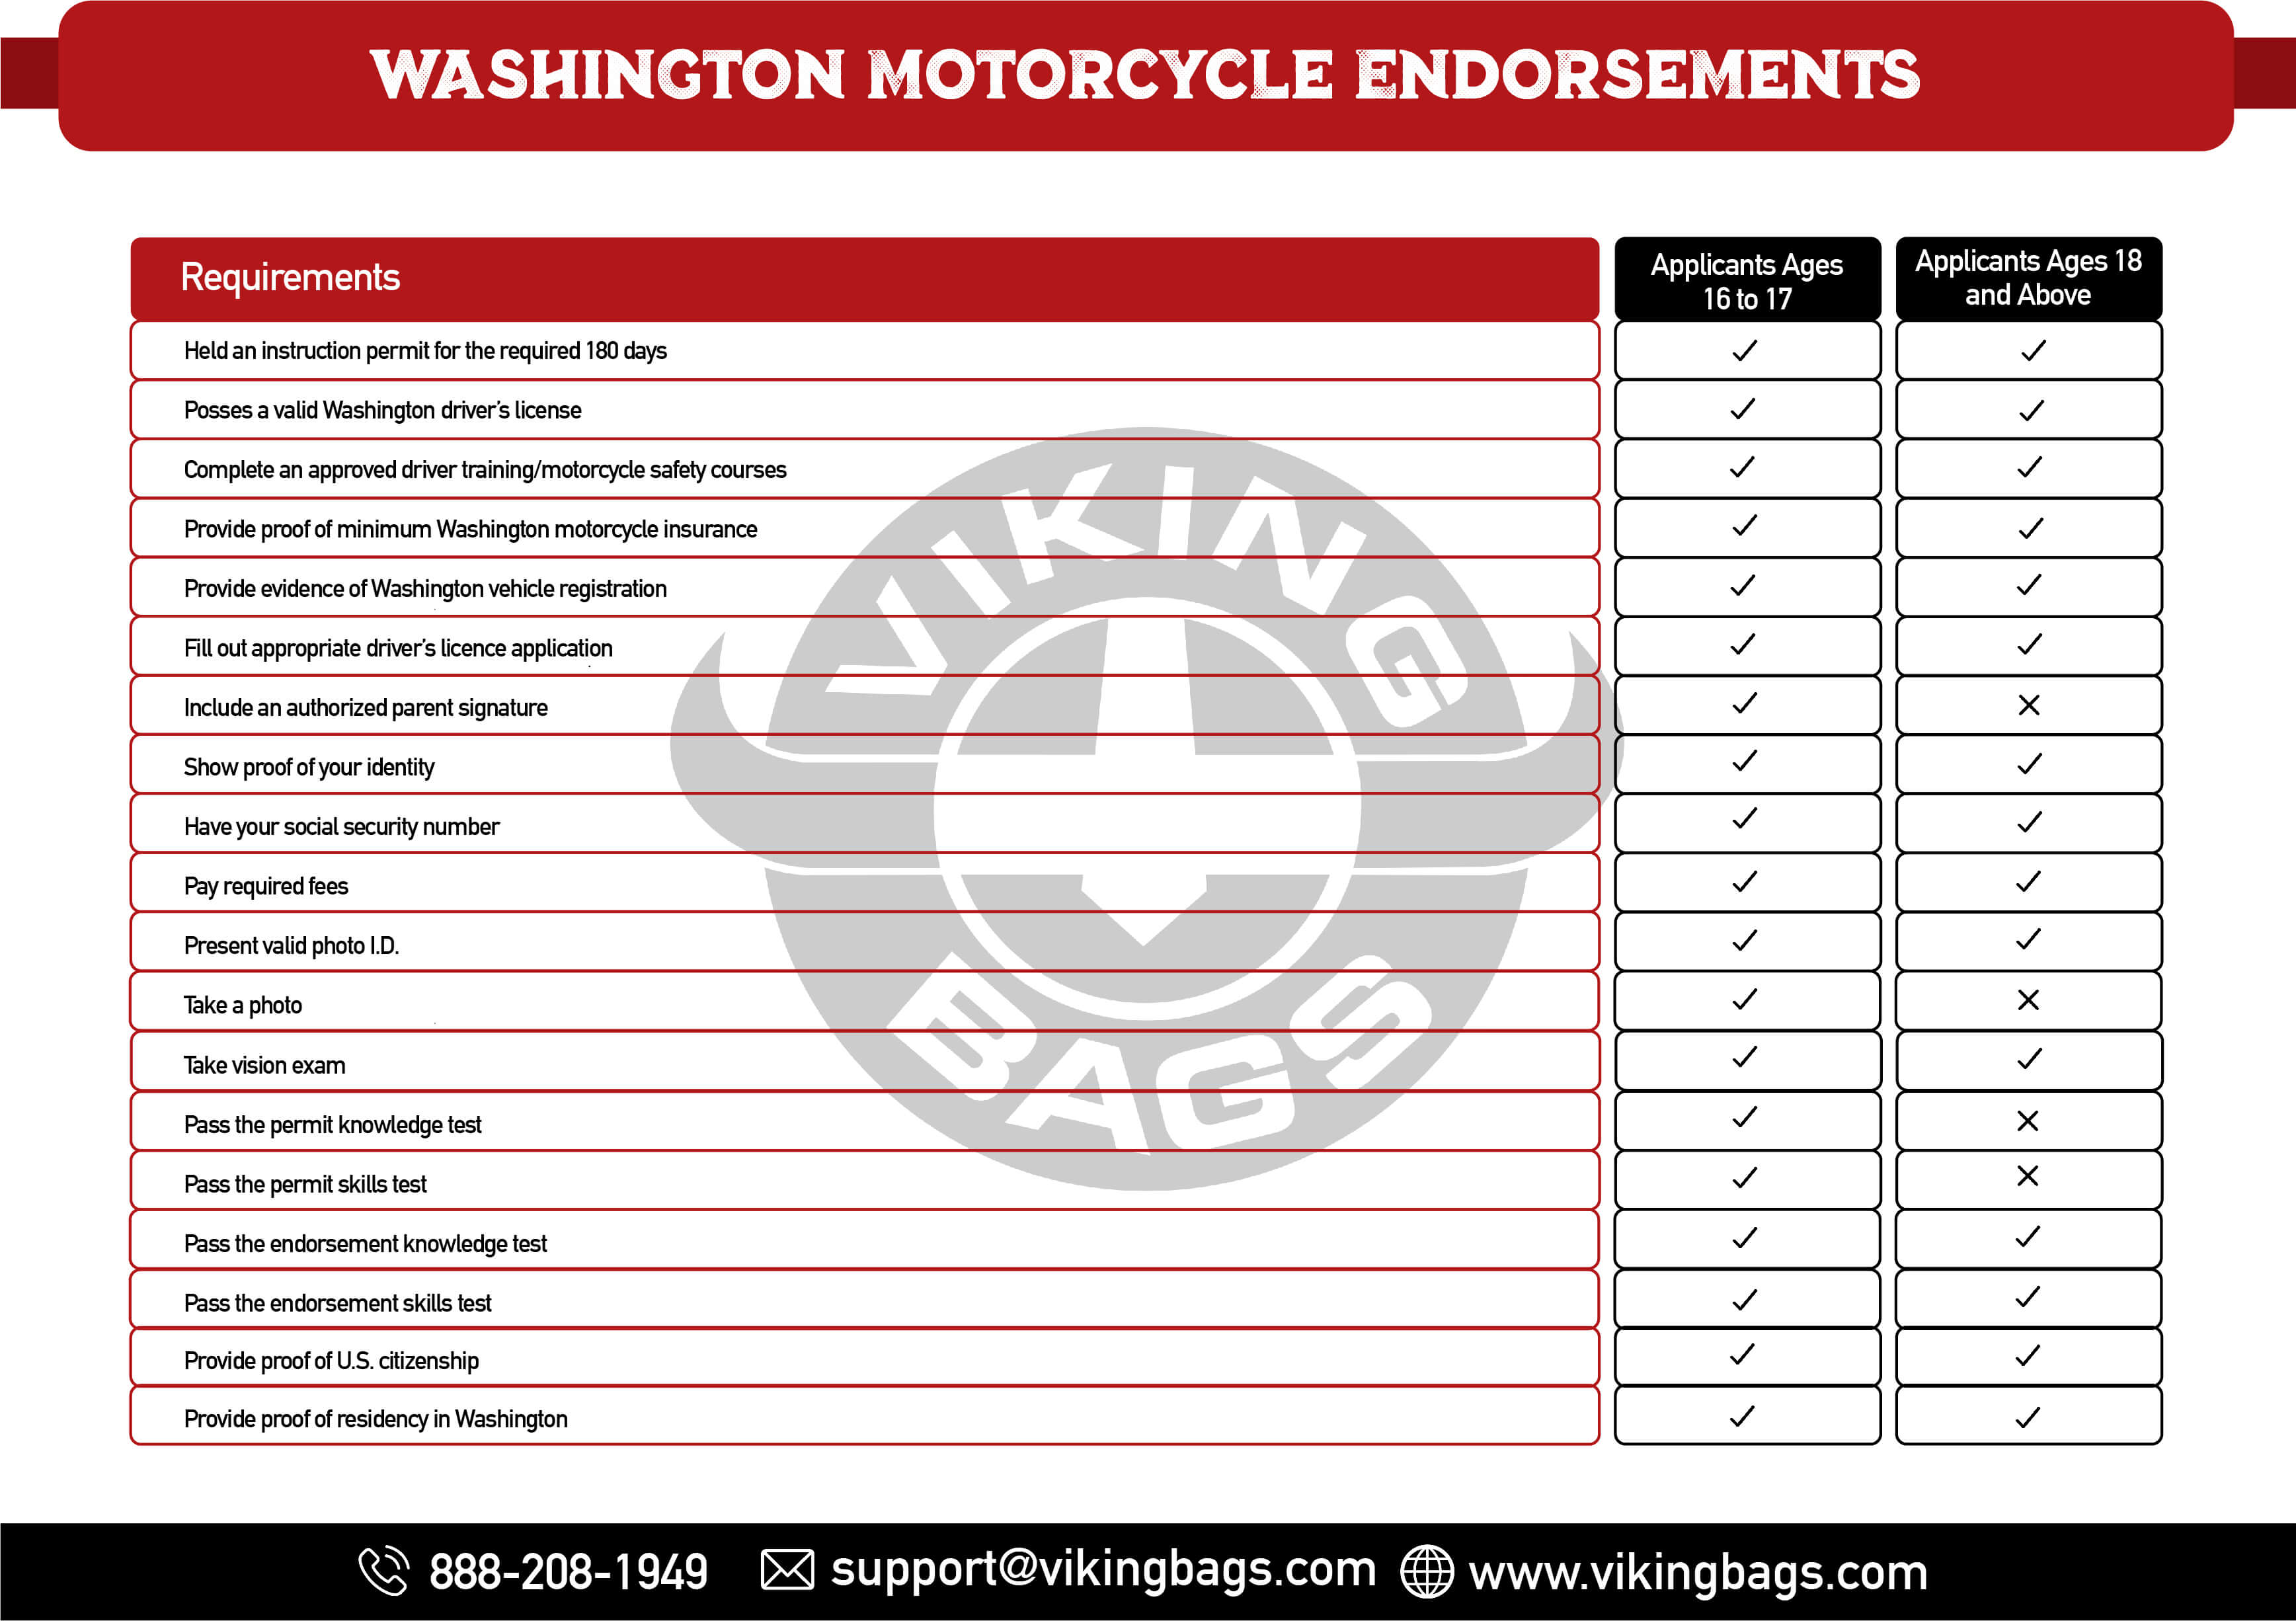 Requirements to Apply for Washington Motorcycle Endorsements